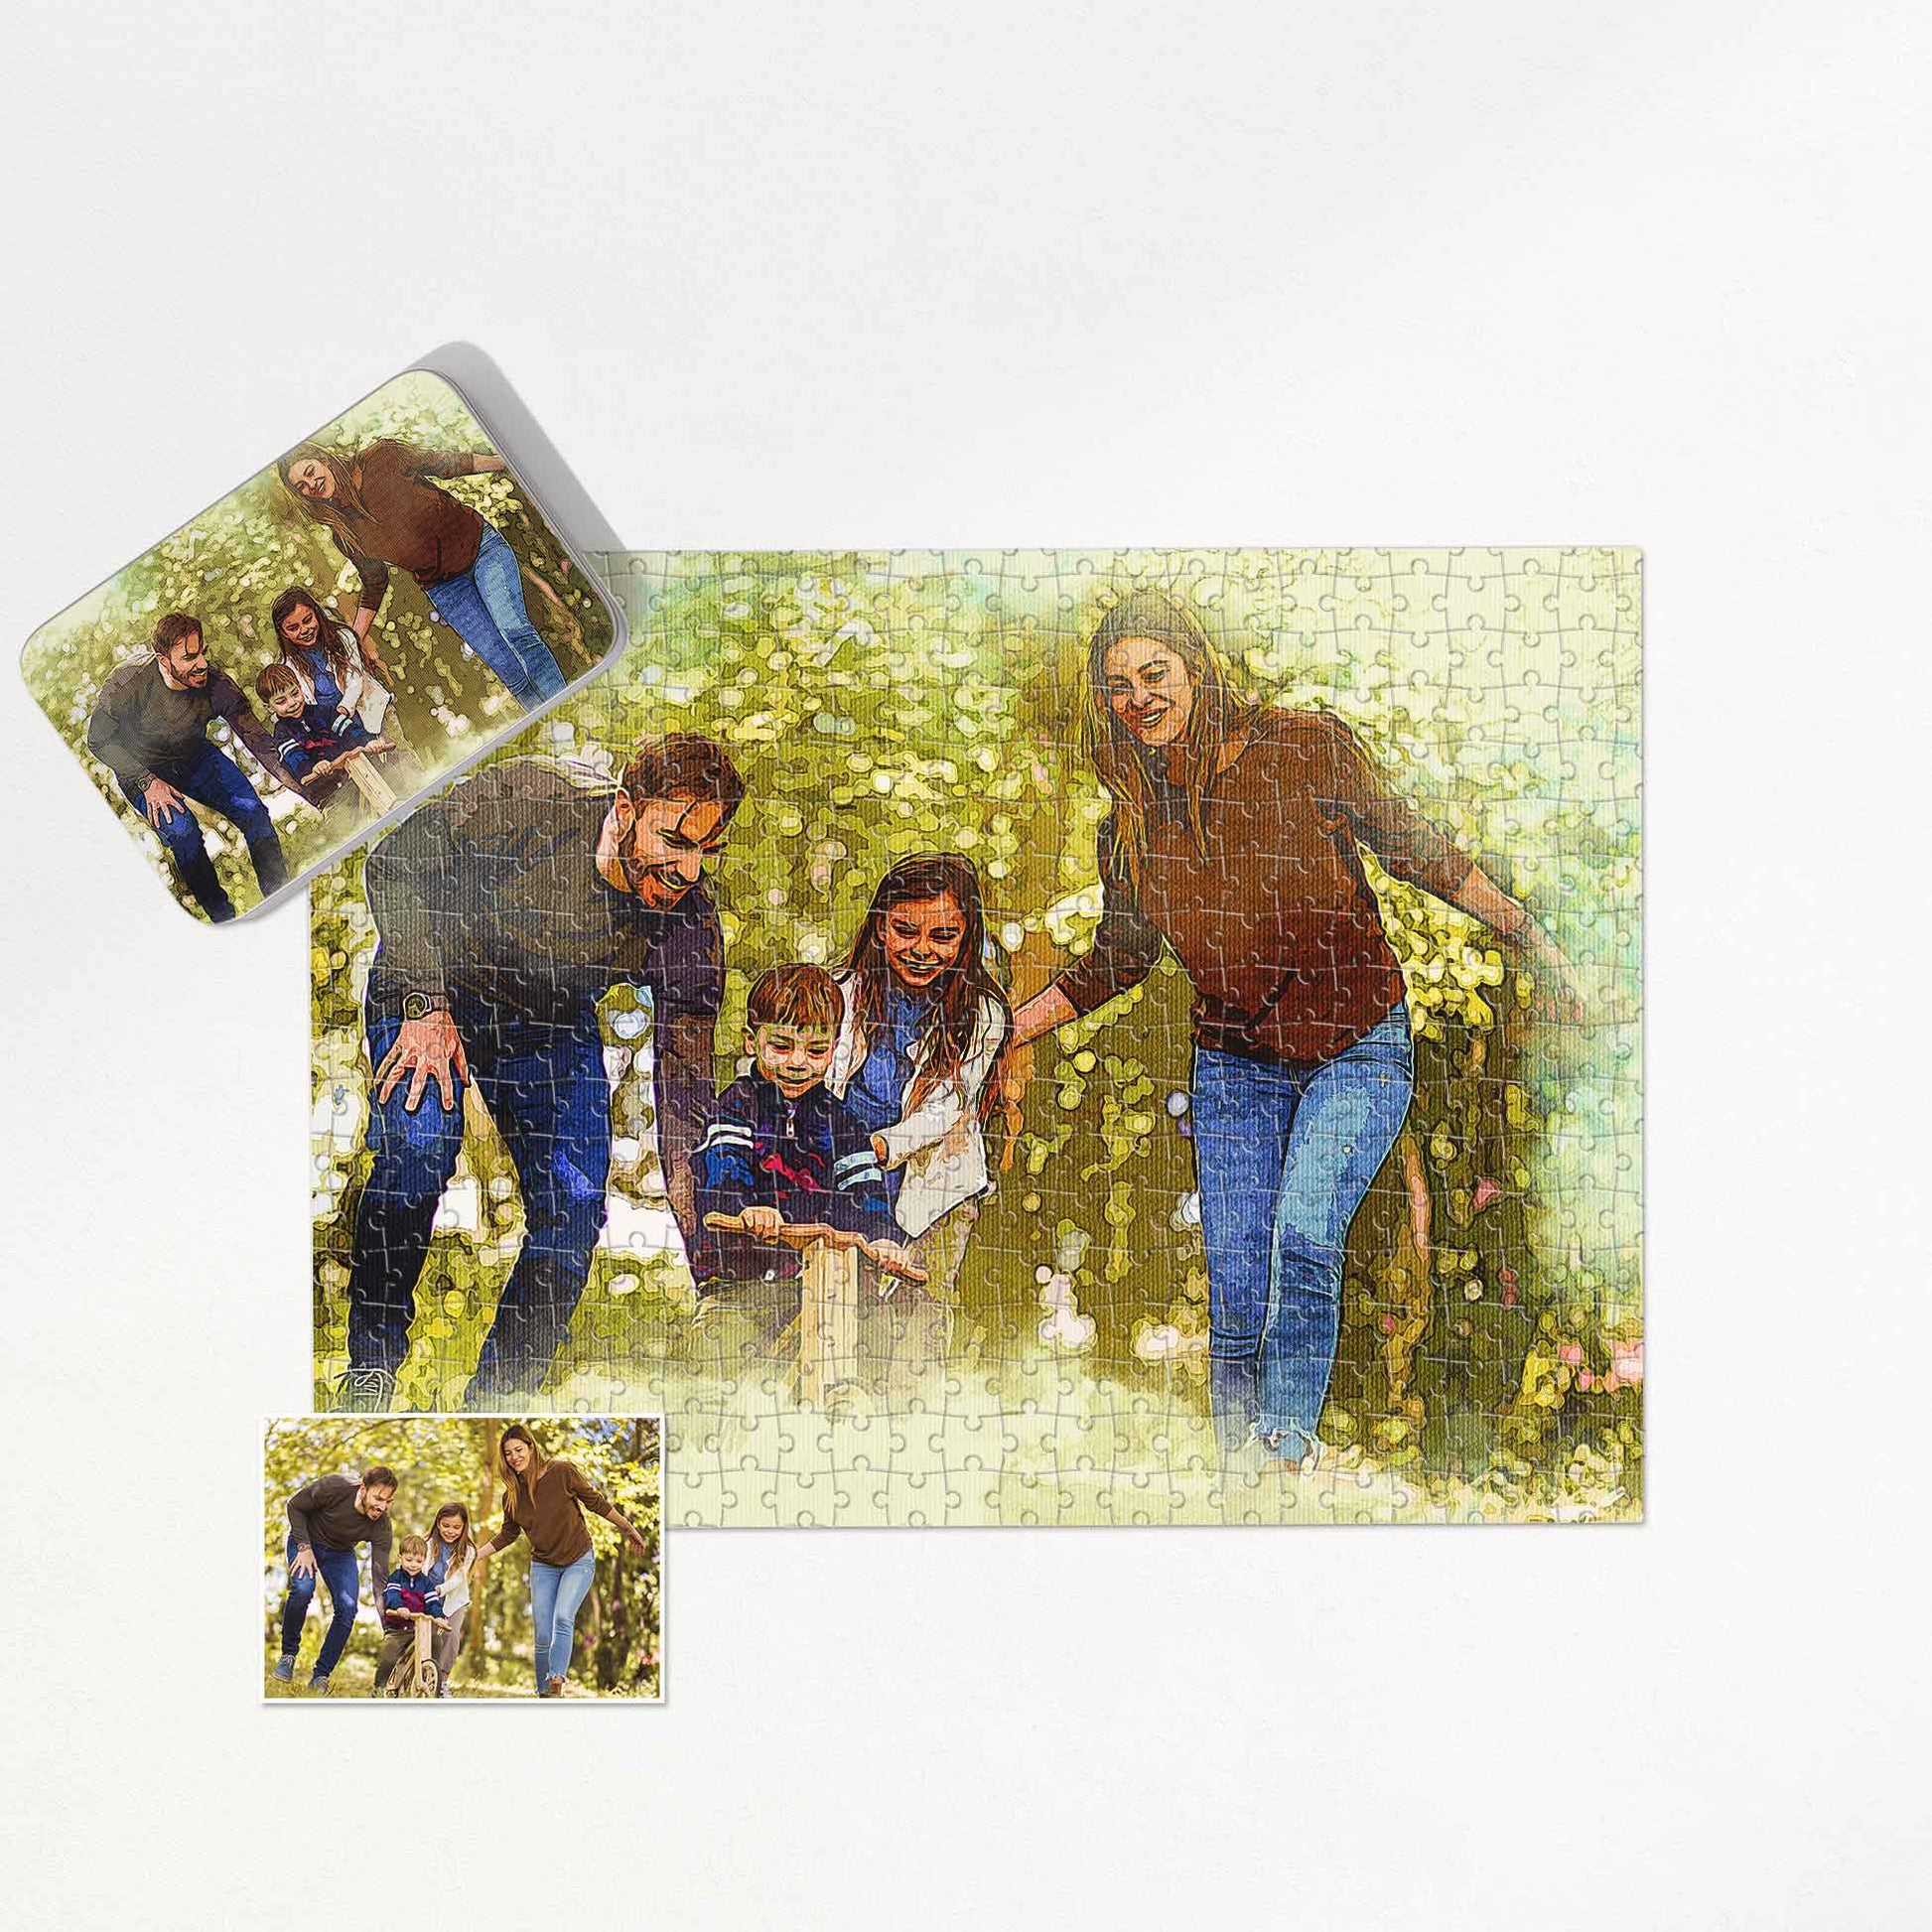 Gift the joy of creativity with our Personalized Watercolor Texture Jigsaw Puzzle. Handmade for a personal touch, the natural and vibrant textures create a puzzle masterpiece that is truly one-of-a-kind